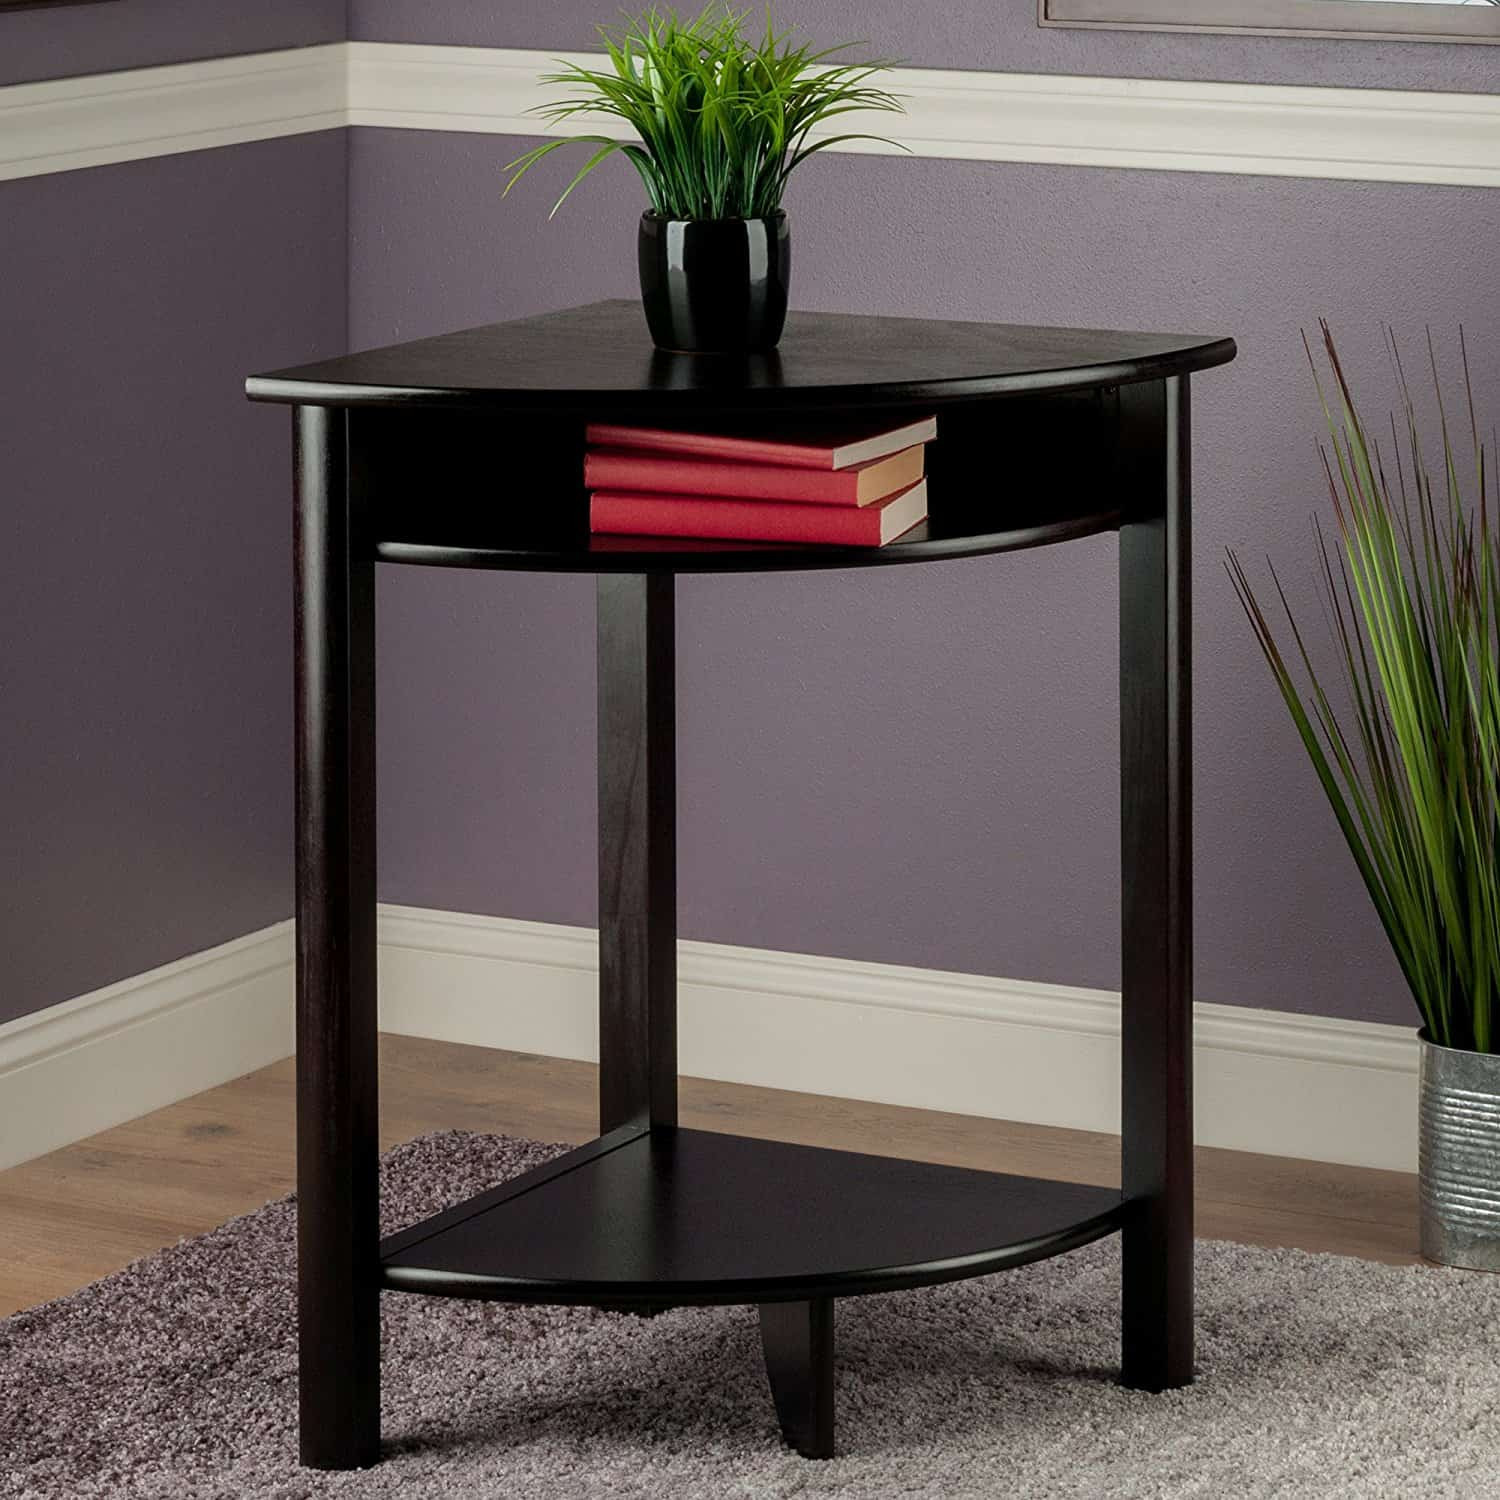 Small Corner Table For Bathroom
 Finding the Best Small Corner Tables 11 Beauties Featured